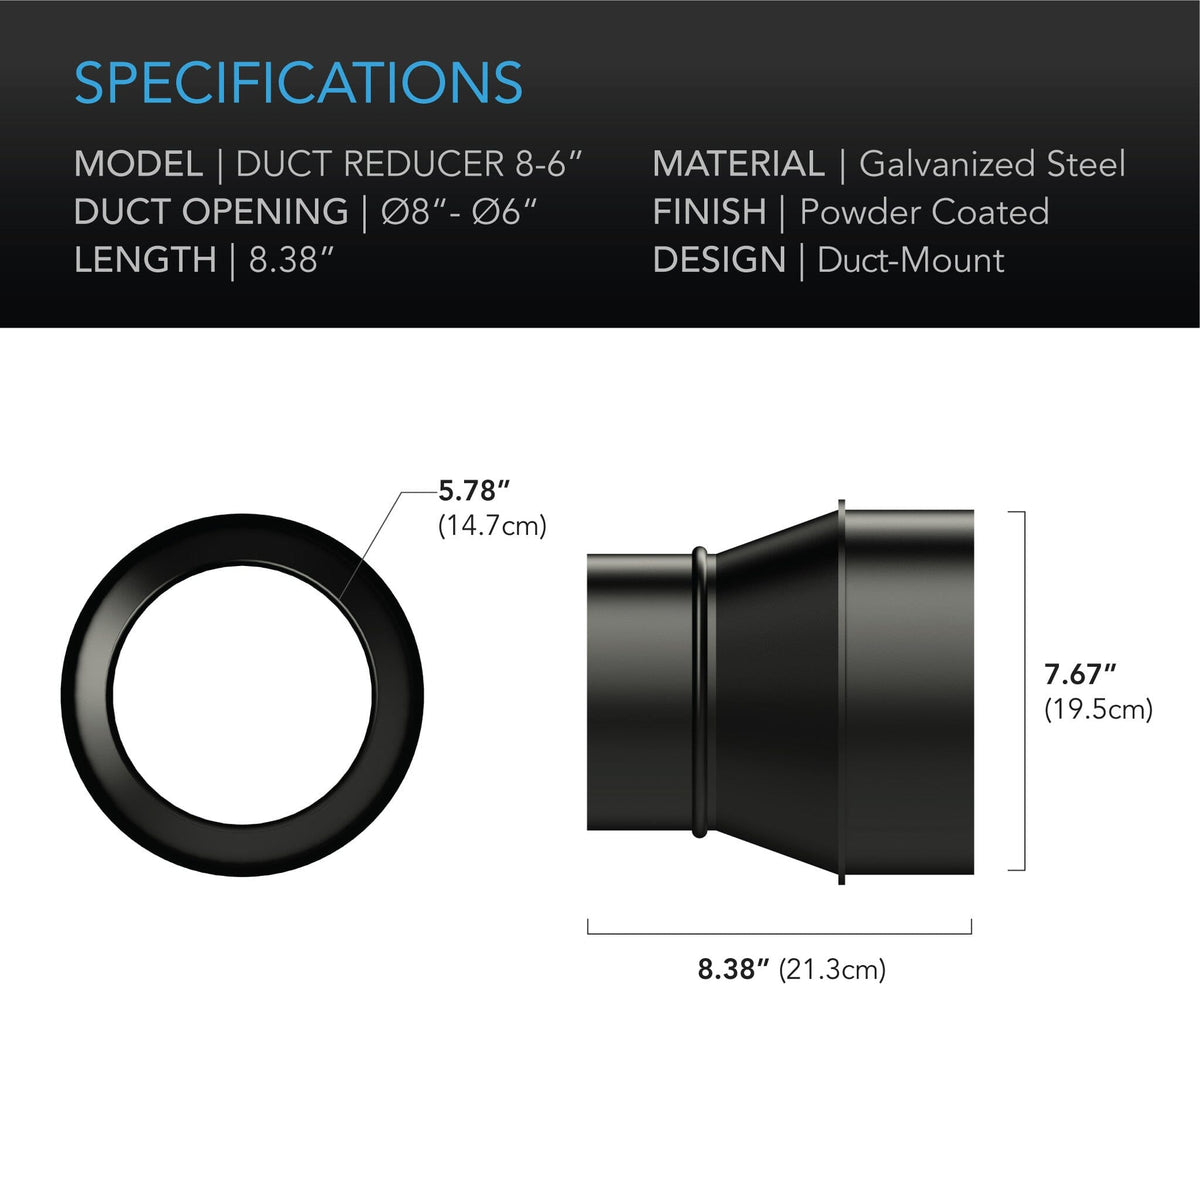 Duct Reducer 8 to 6 inch specifications